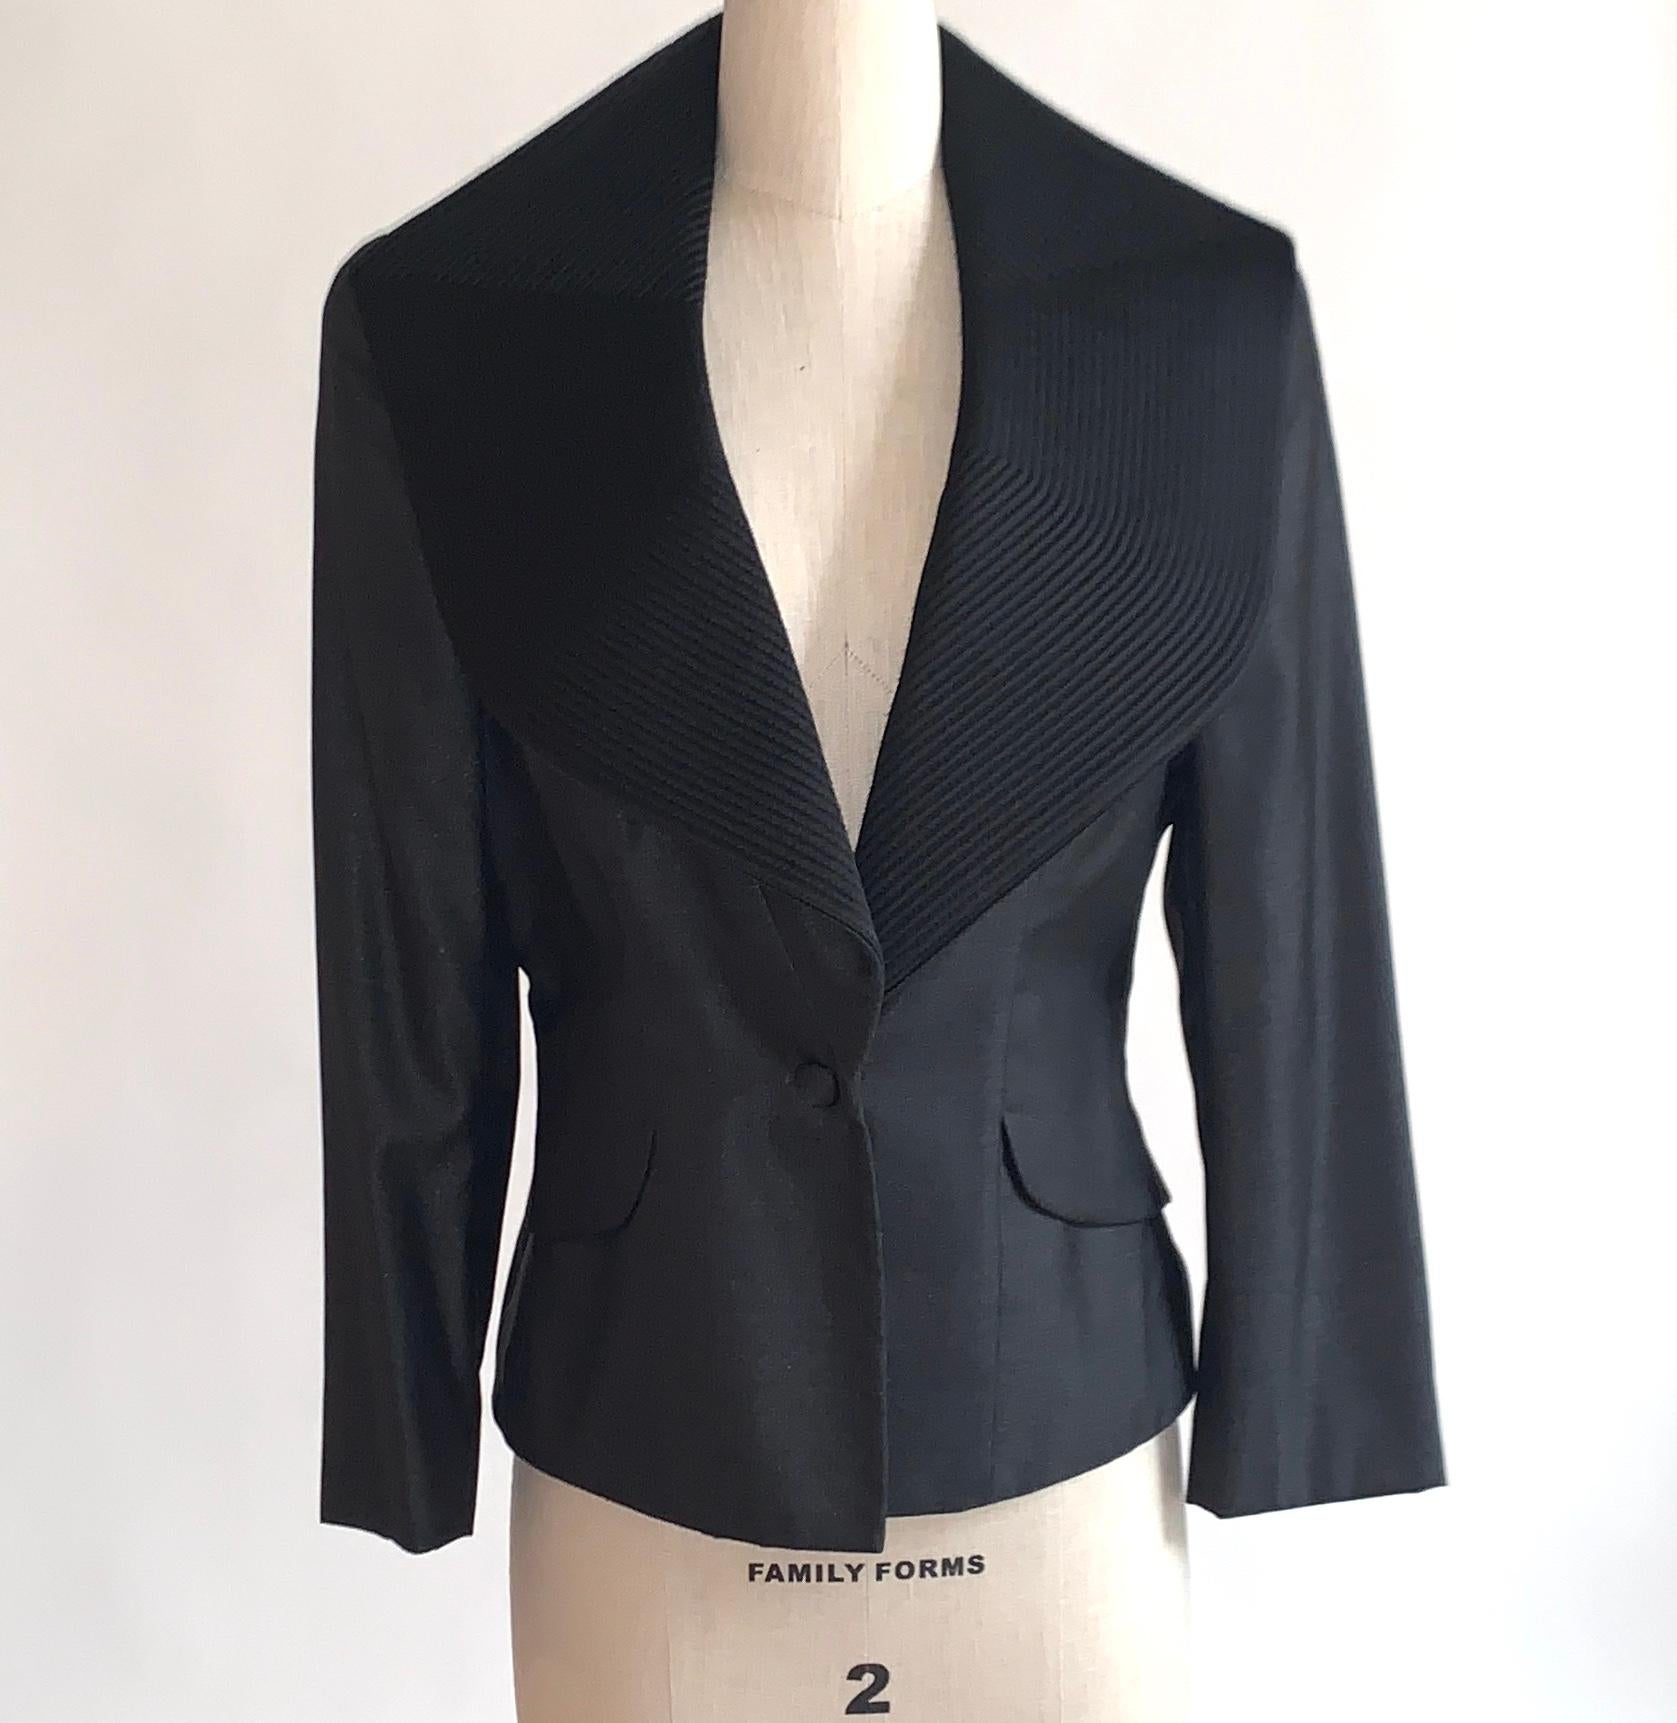 Alexander McQueen tailored blazer in a very dark charcoal grey miniature herringbone featuring amazing black statement collar with stitched detail throughout. Circa 2007. Single cloth covered button closure at front and three at each cuff. Padding